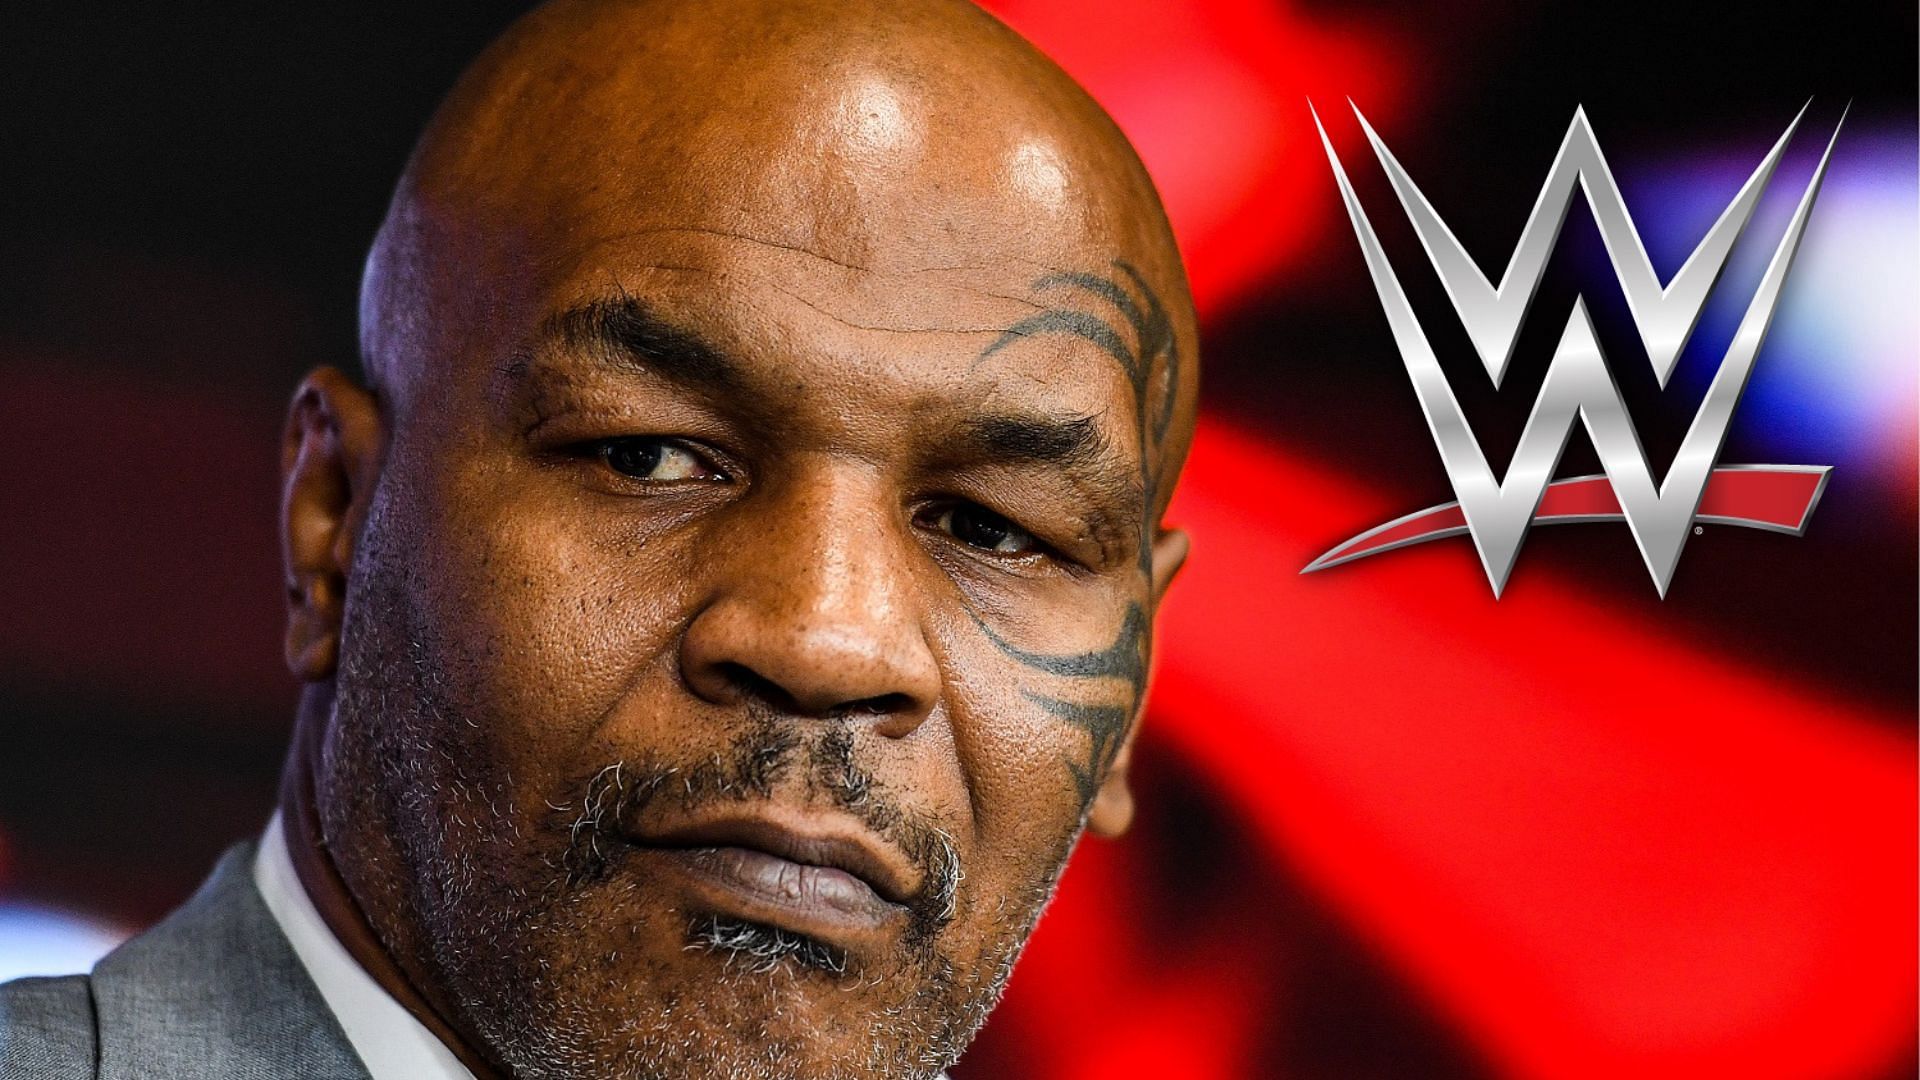 Mike Tyson had some interesting comments this week